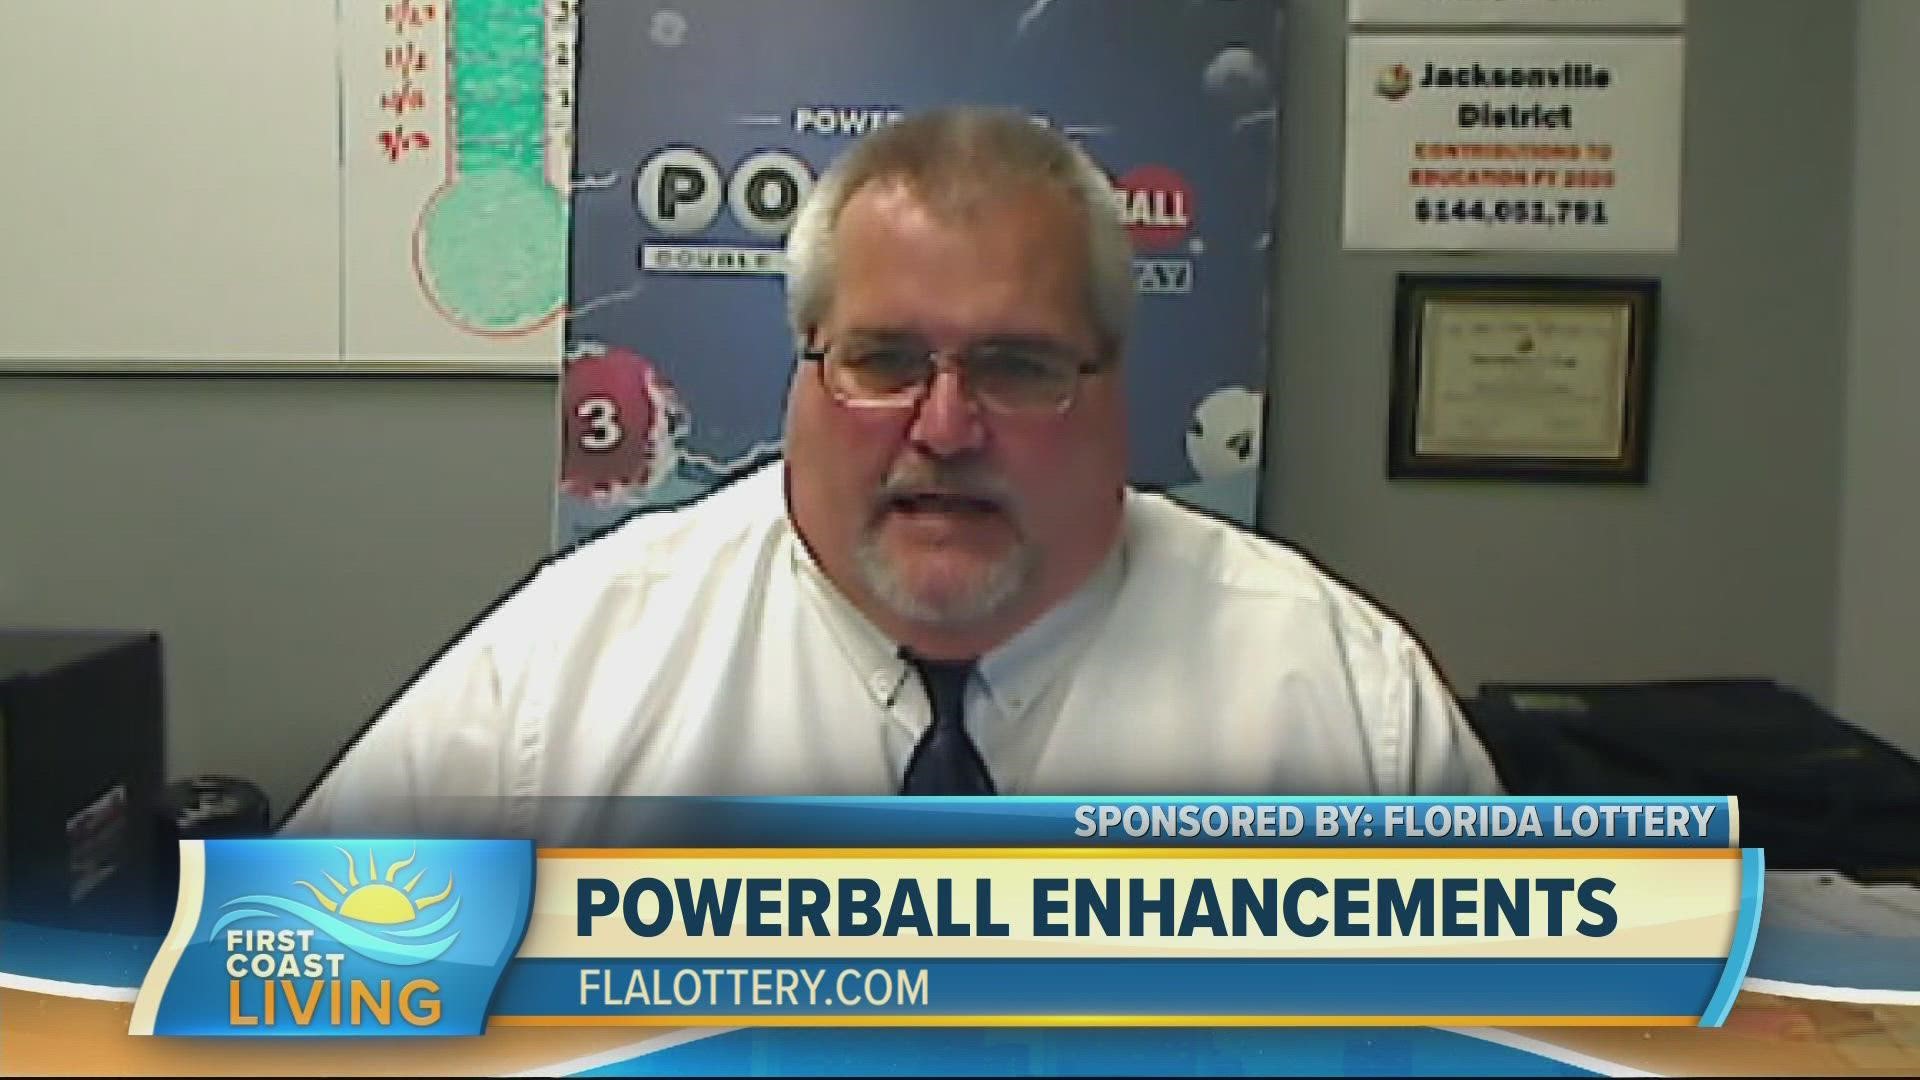 Powerball enhancements make things even more interesting if you are looking to win the jackpot!